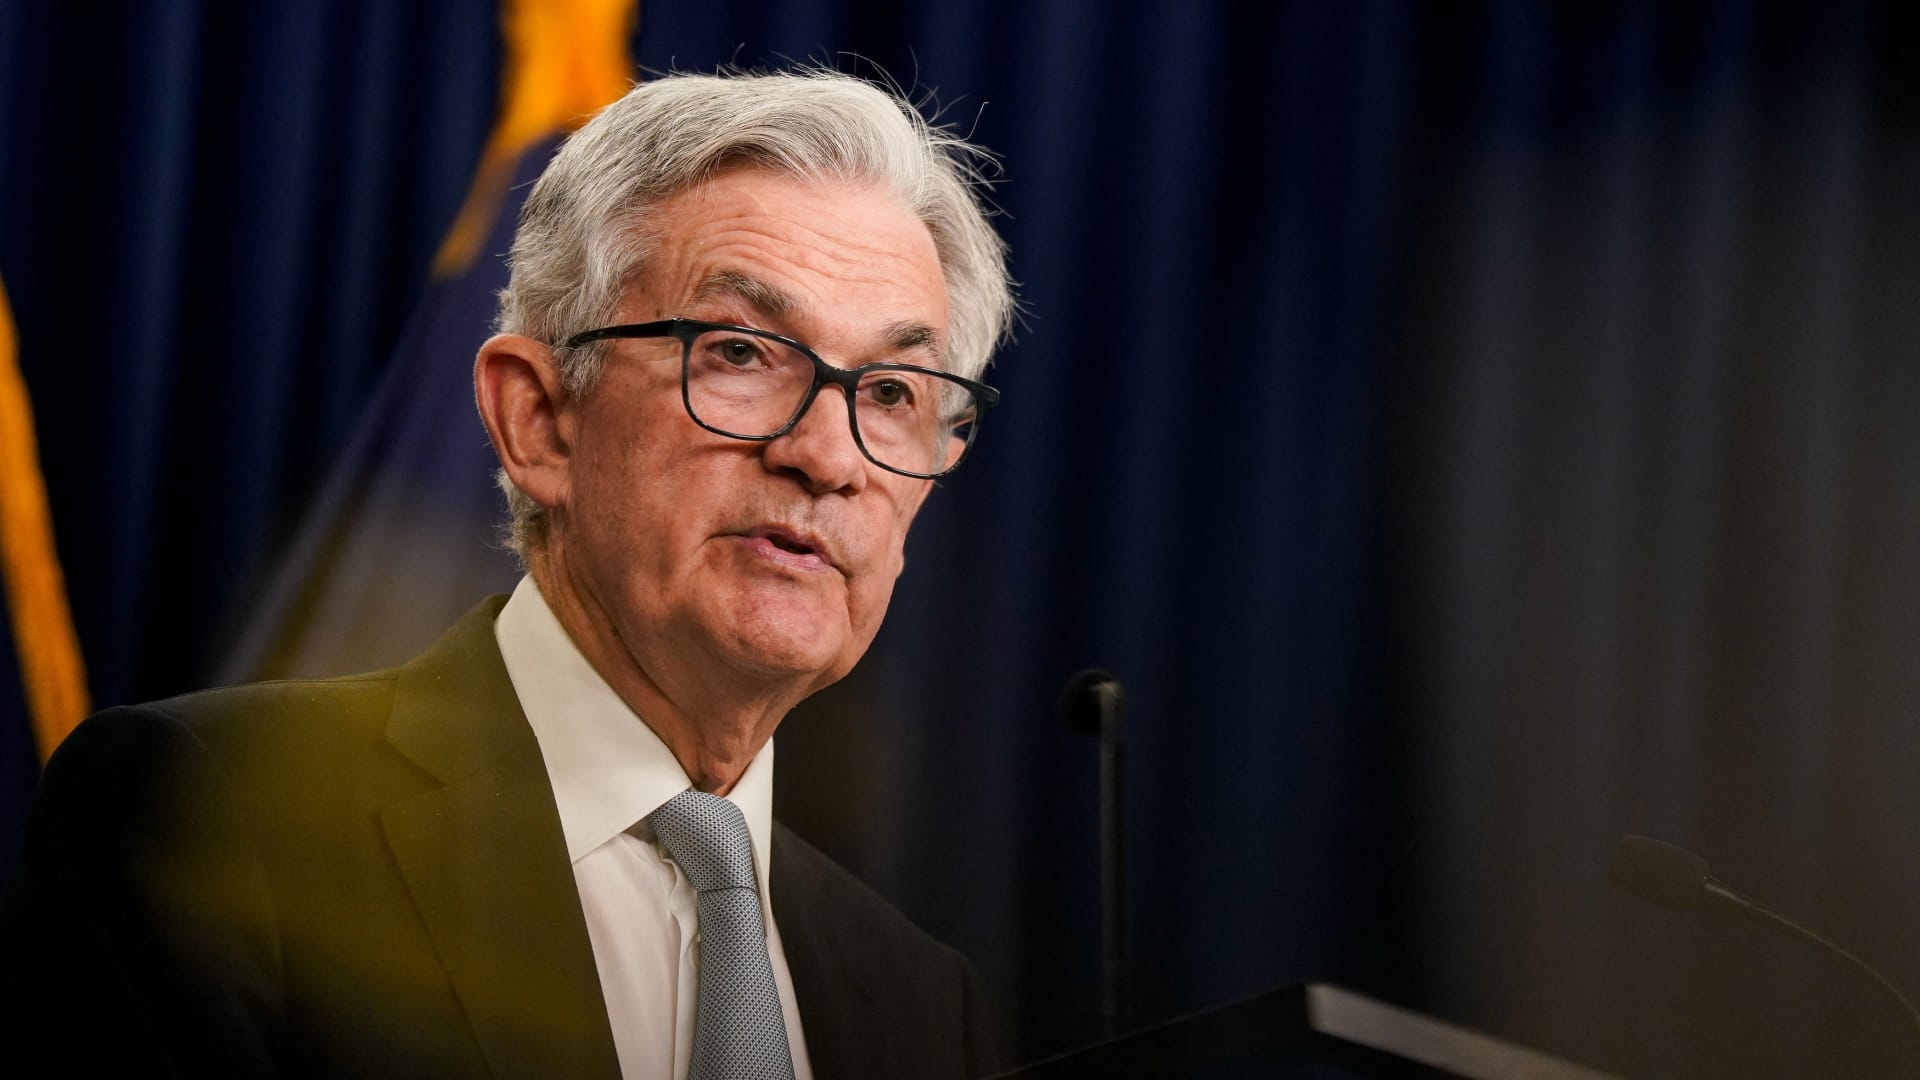 Fed rate hike expected to be half a percentage point as central bank fights inflation